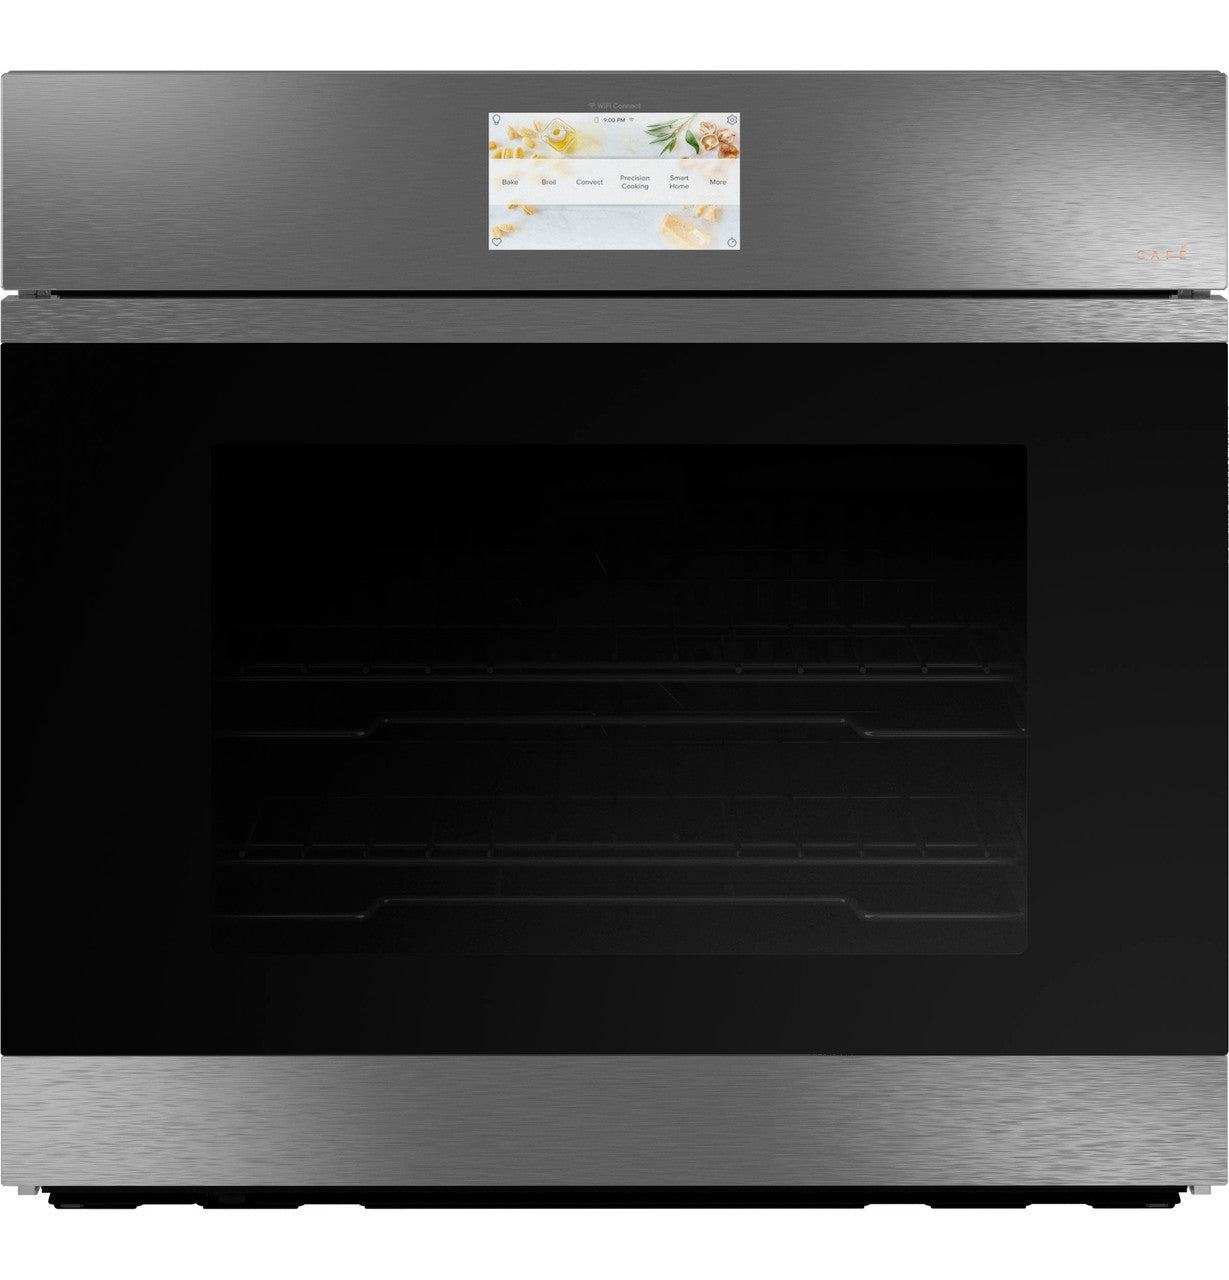 Café - 5 cu. ft Single Wall Oven in Platinum Glass - CTS90DM2NS5